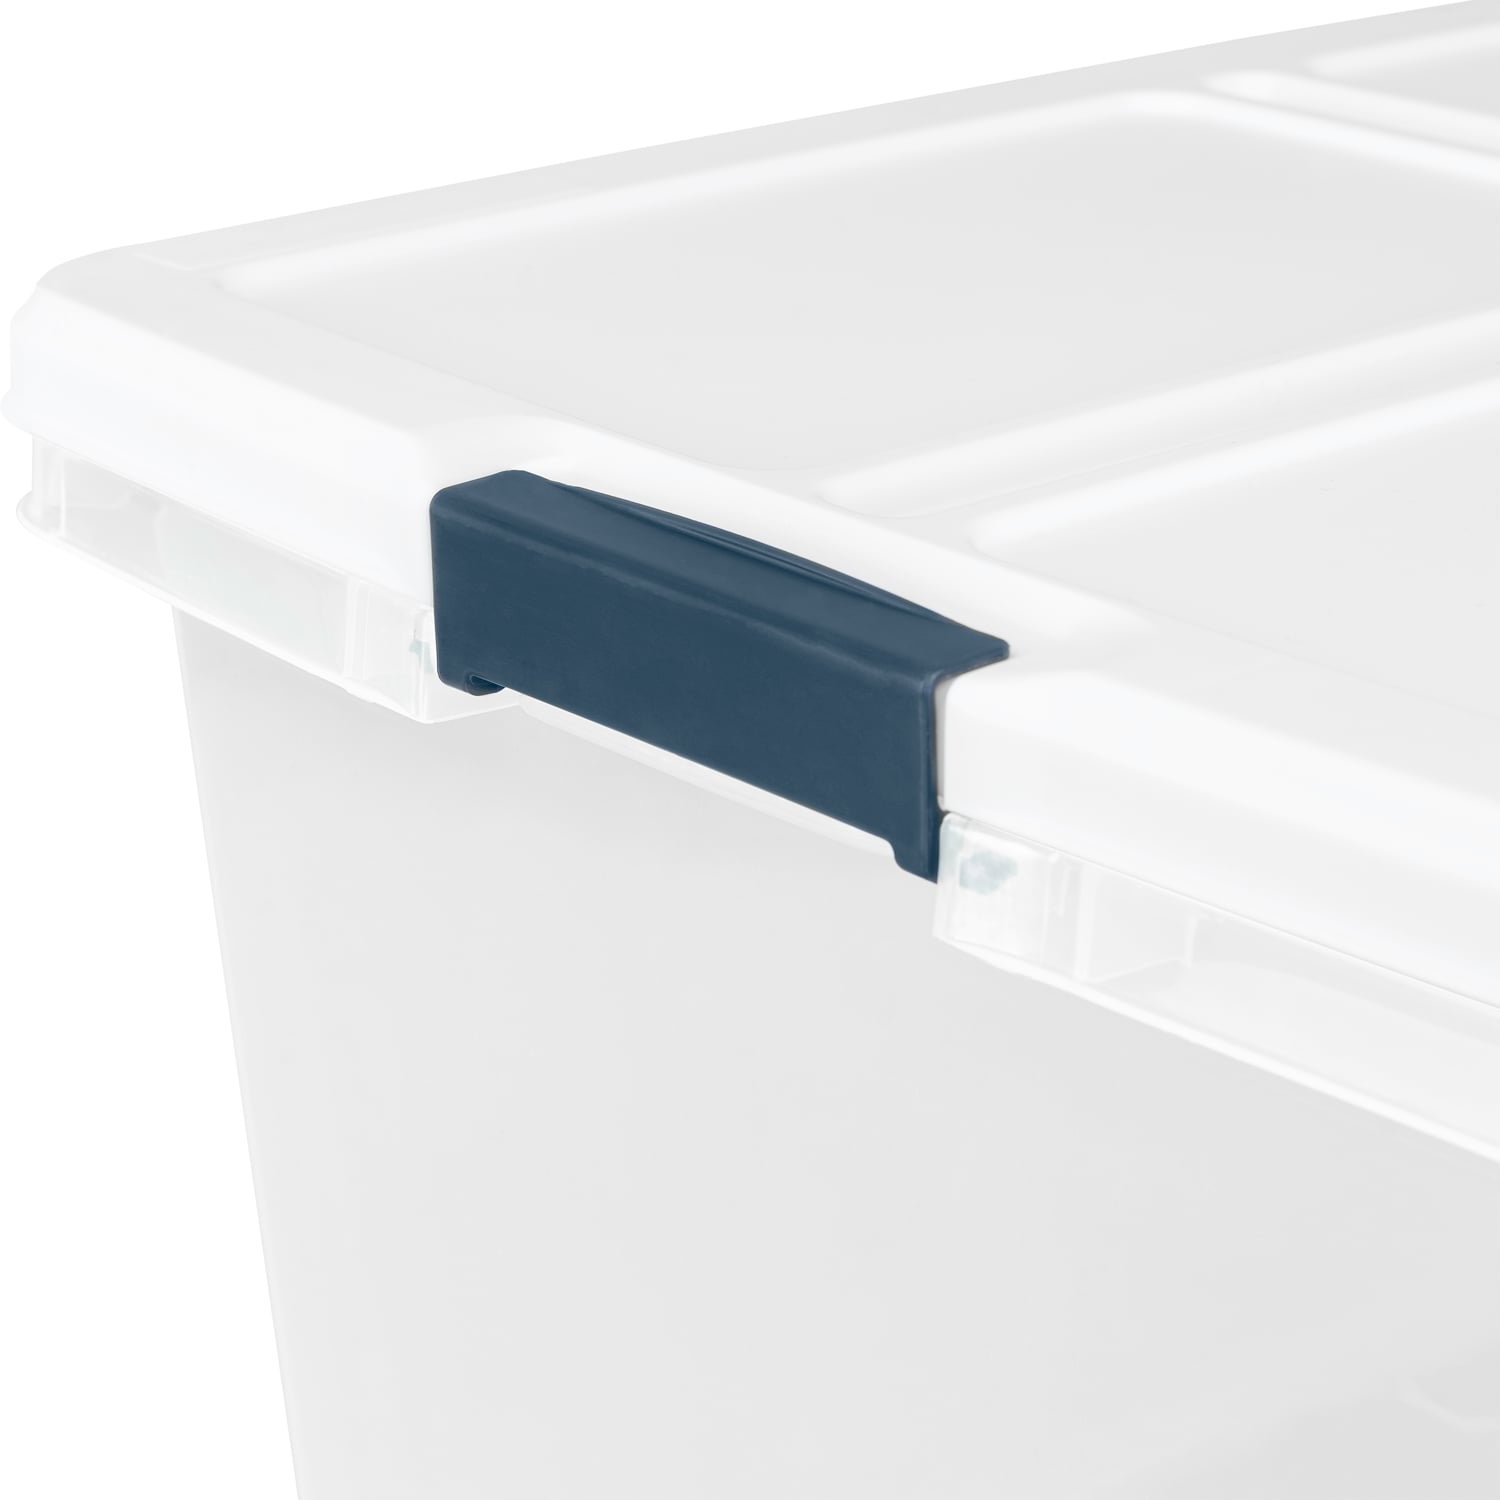 Project Source 16.5 Gal (66 Qt) Latched Storage Bin - Product Video 